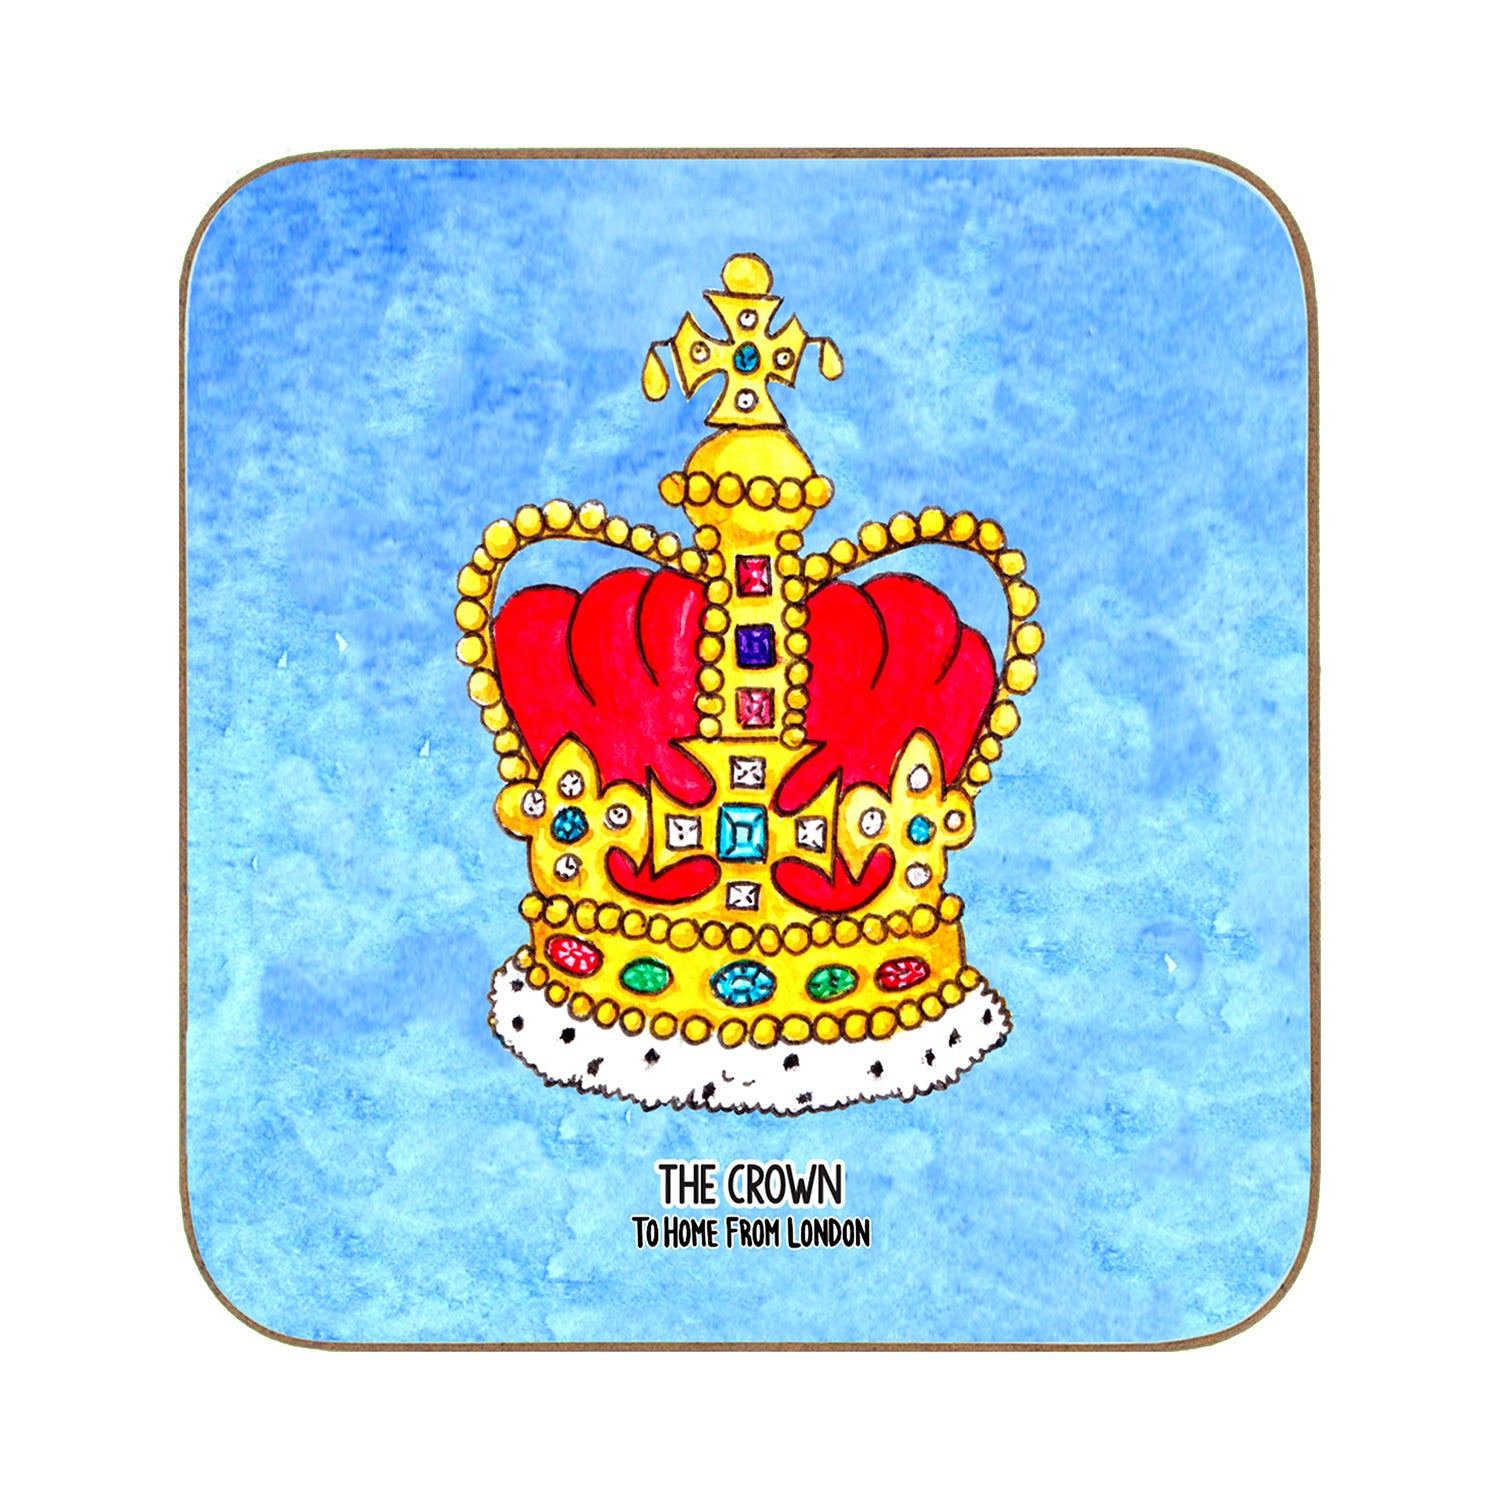 To Home From London - Magnetic Coaster - The Crown 1